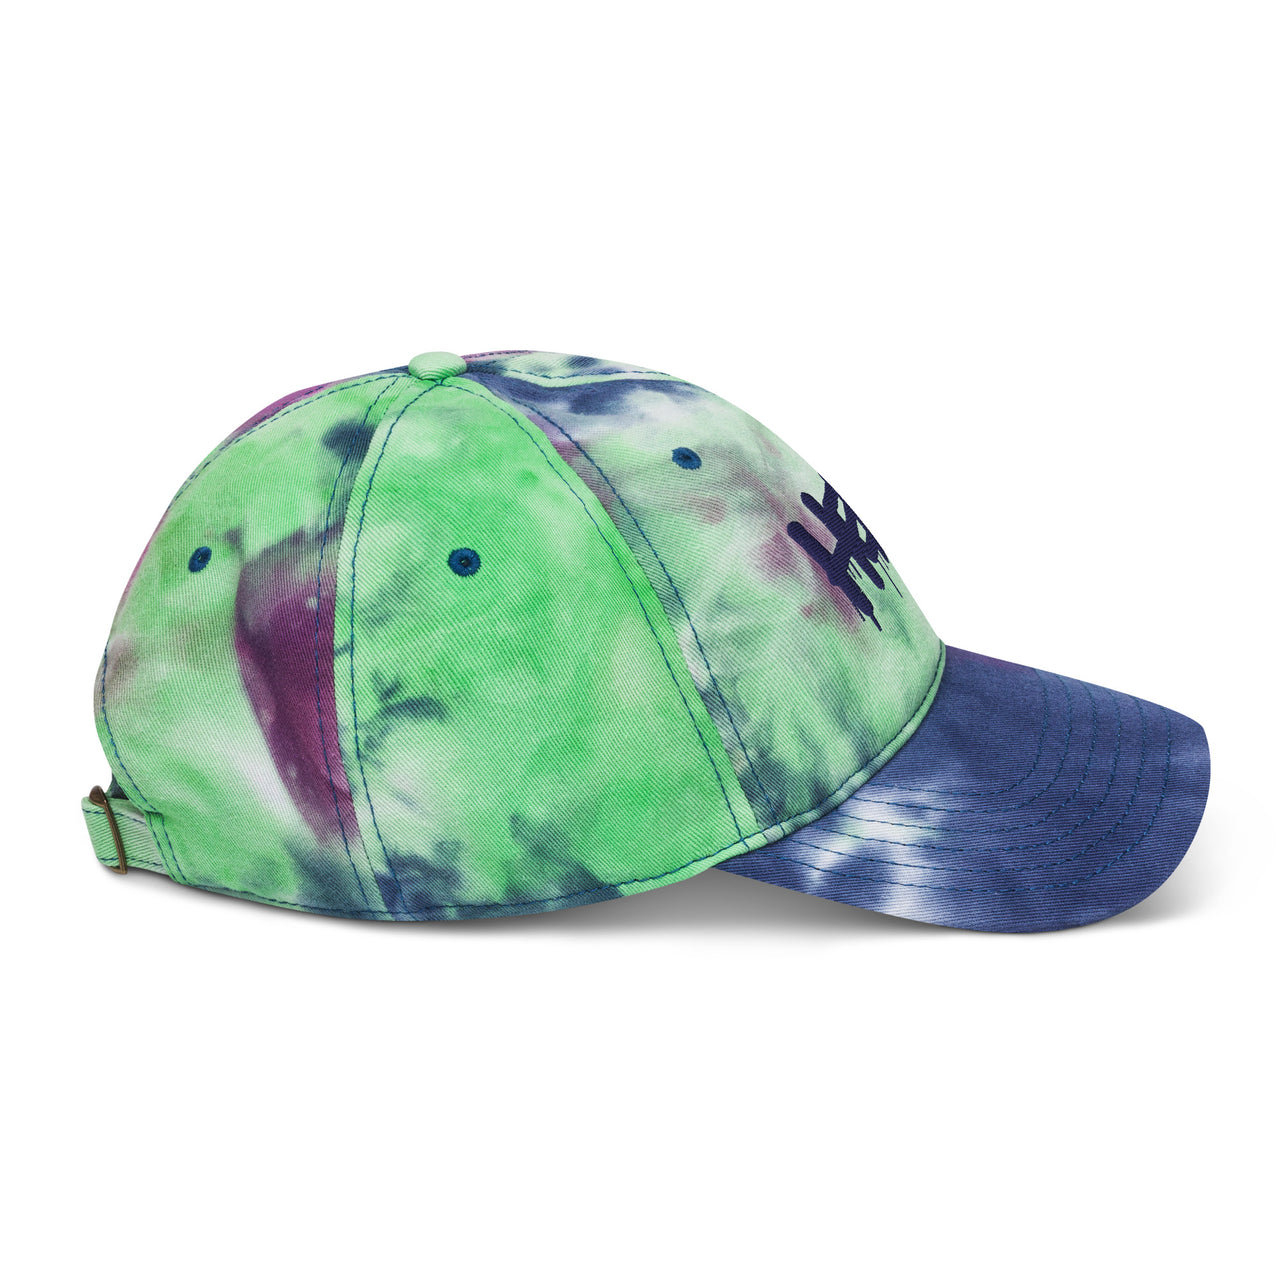 "Hero" Embroidery Tie Dye Hat - Add a Splash of Color to Your Style! - Design Hero